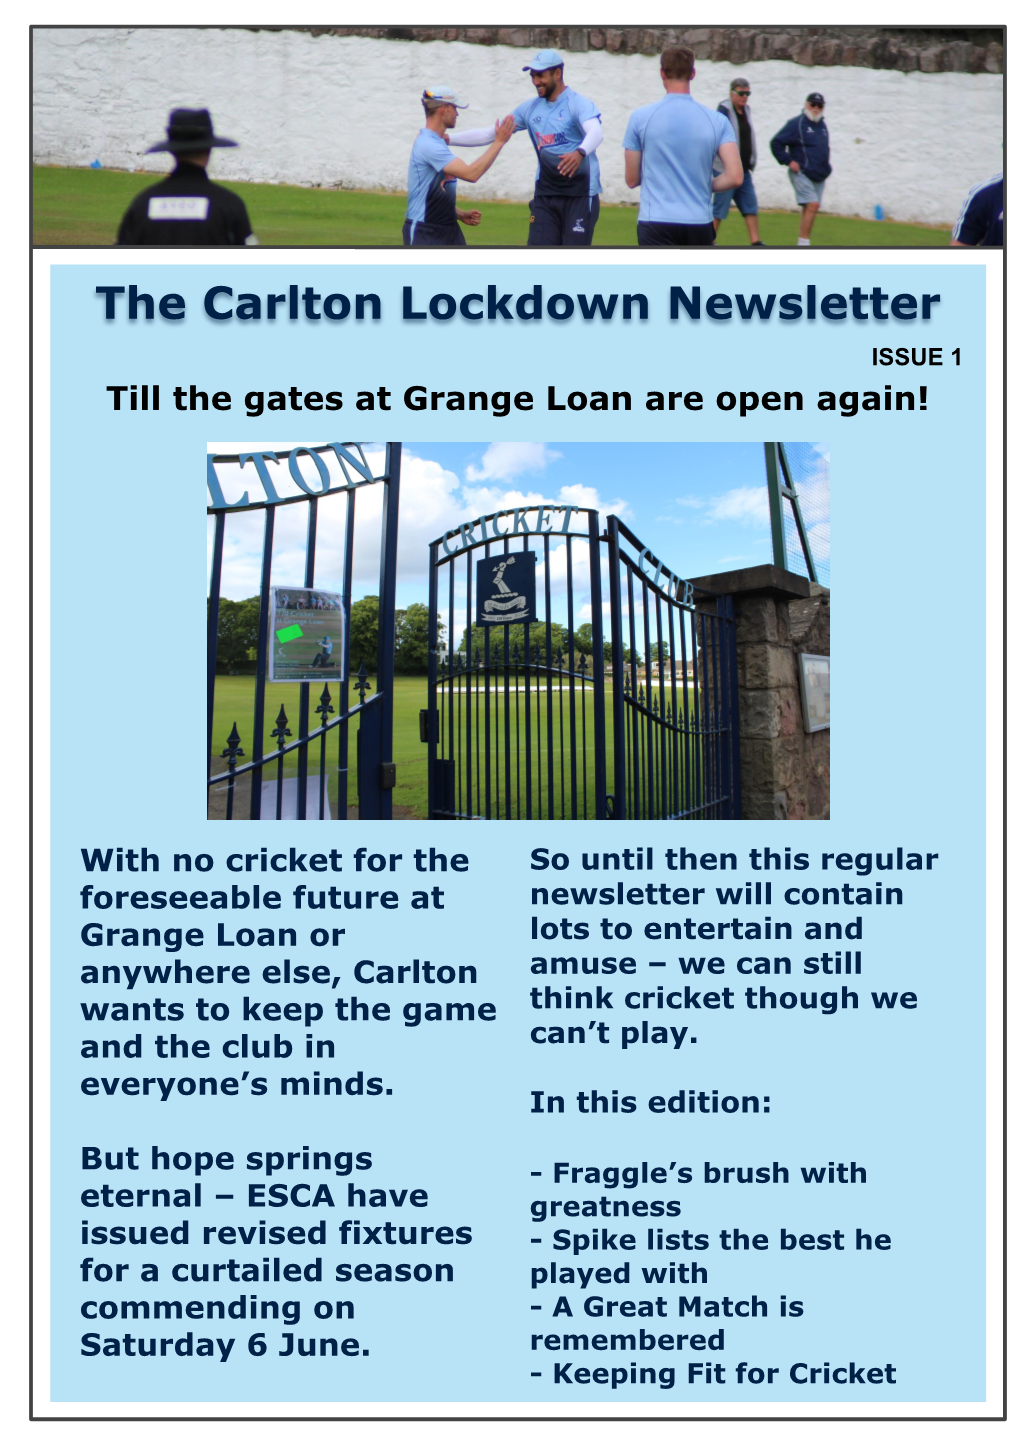 The Carlton Lockdown Newsletter ISSUE 1 Till the Gates at Grange Loan Are Open Again!